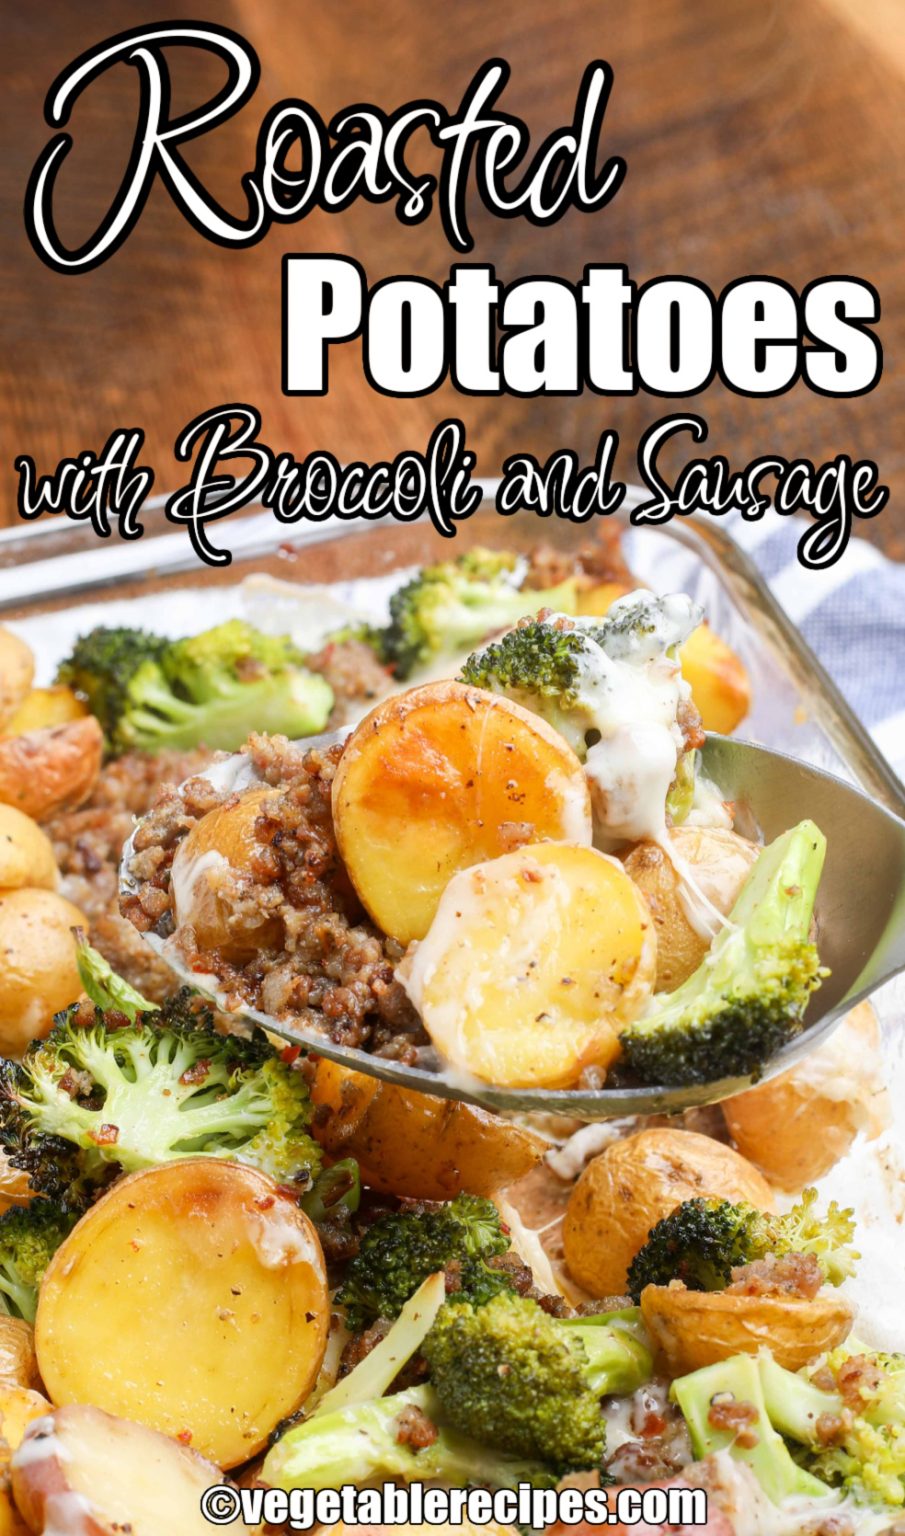 Roasted Potatoes with Sausage and Broccoli - Vegetable Recipes